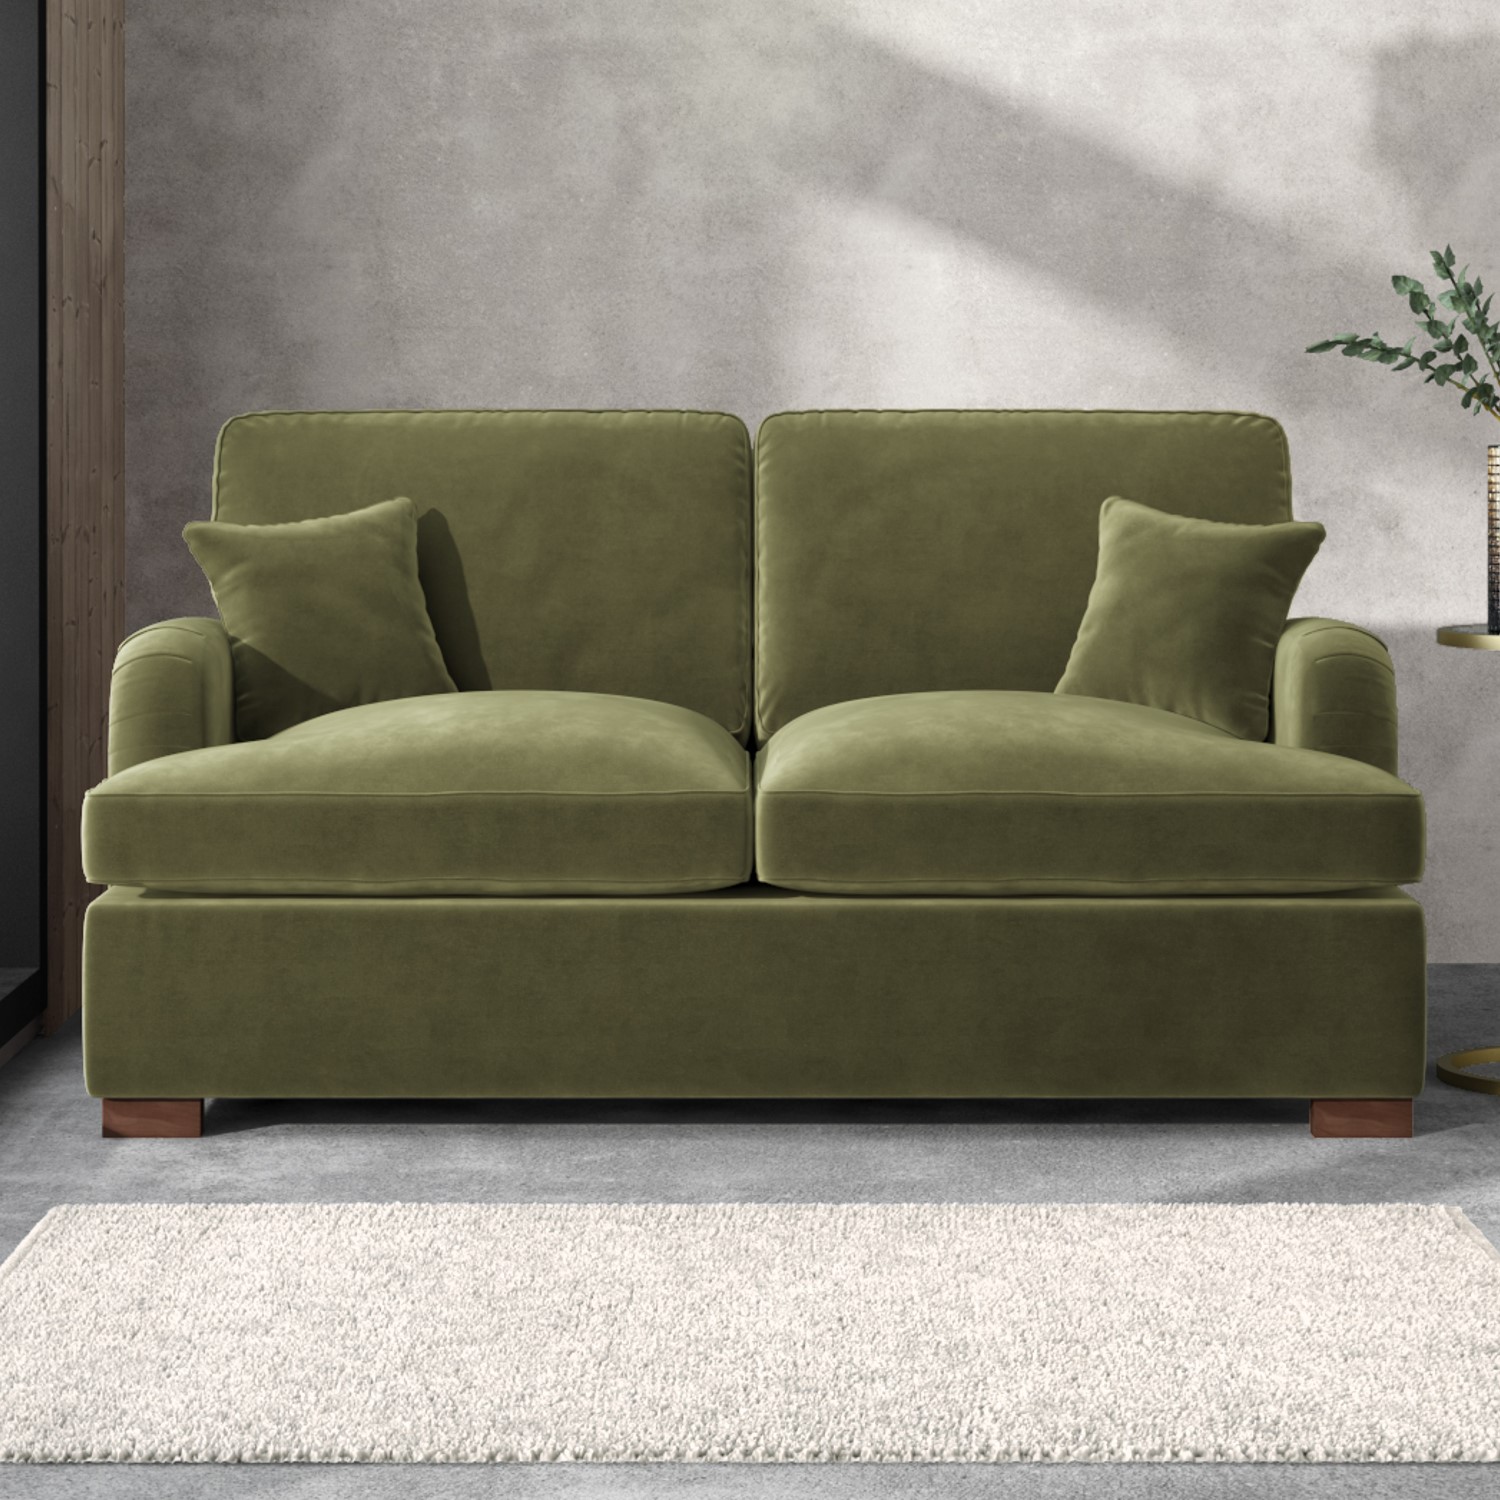 Photo of Olive green velvet pull out sofa bed - seats 2 - payton